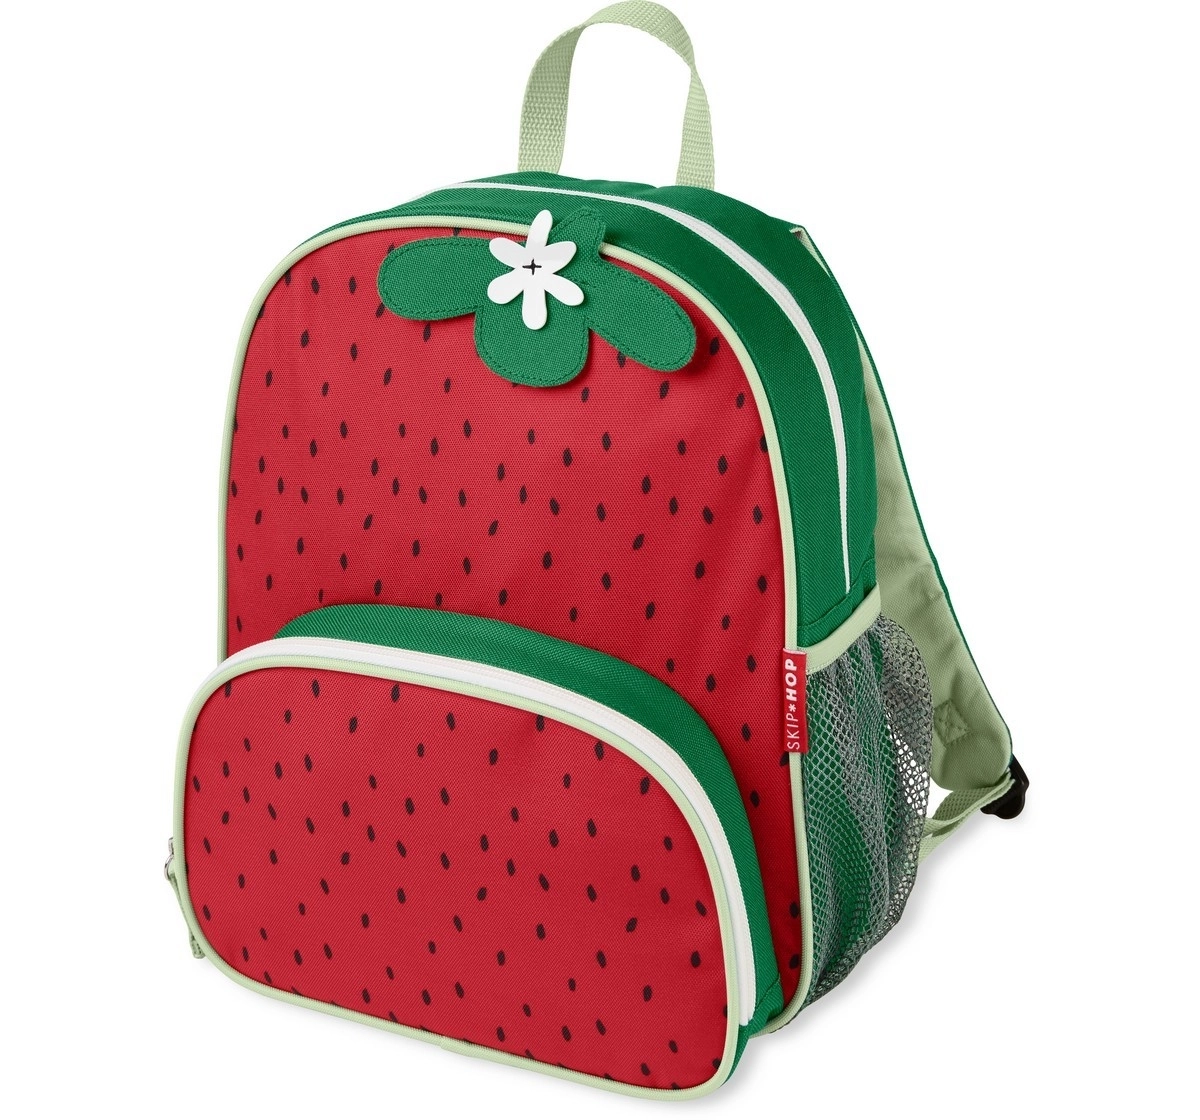 Skip Hop Spark Style Little Kid Backpack Strawberry 3Y+, Multicolour